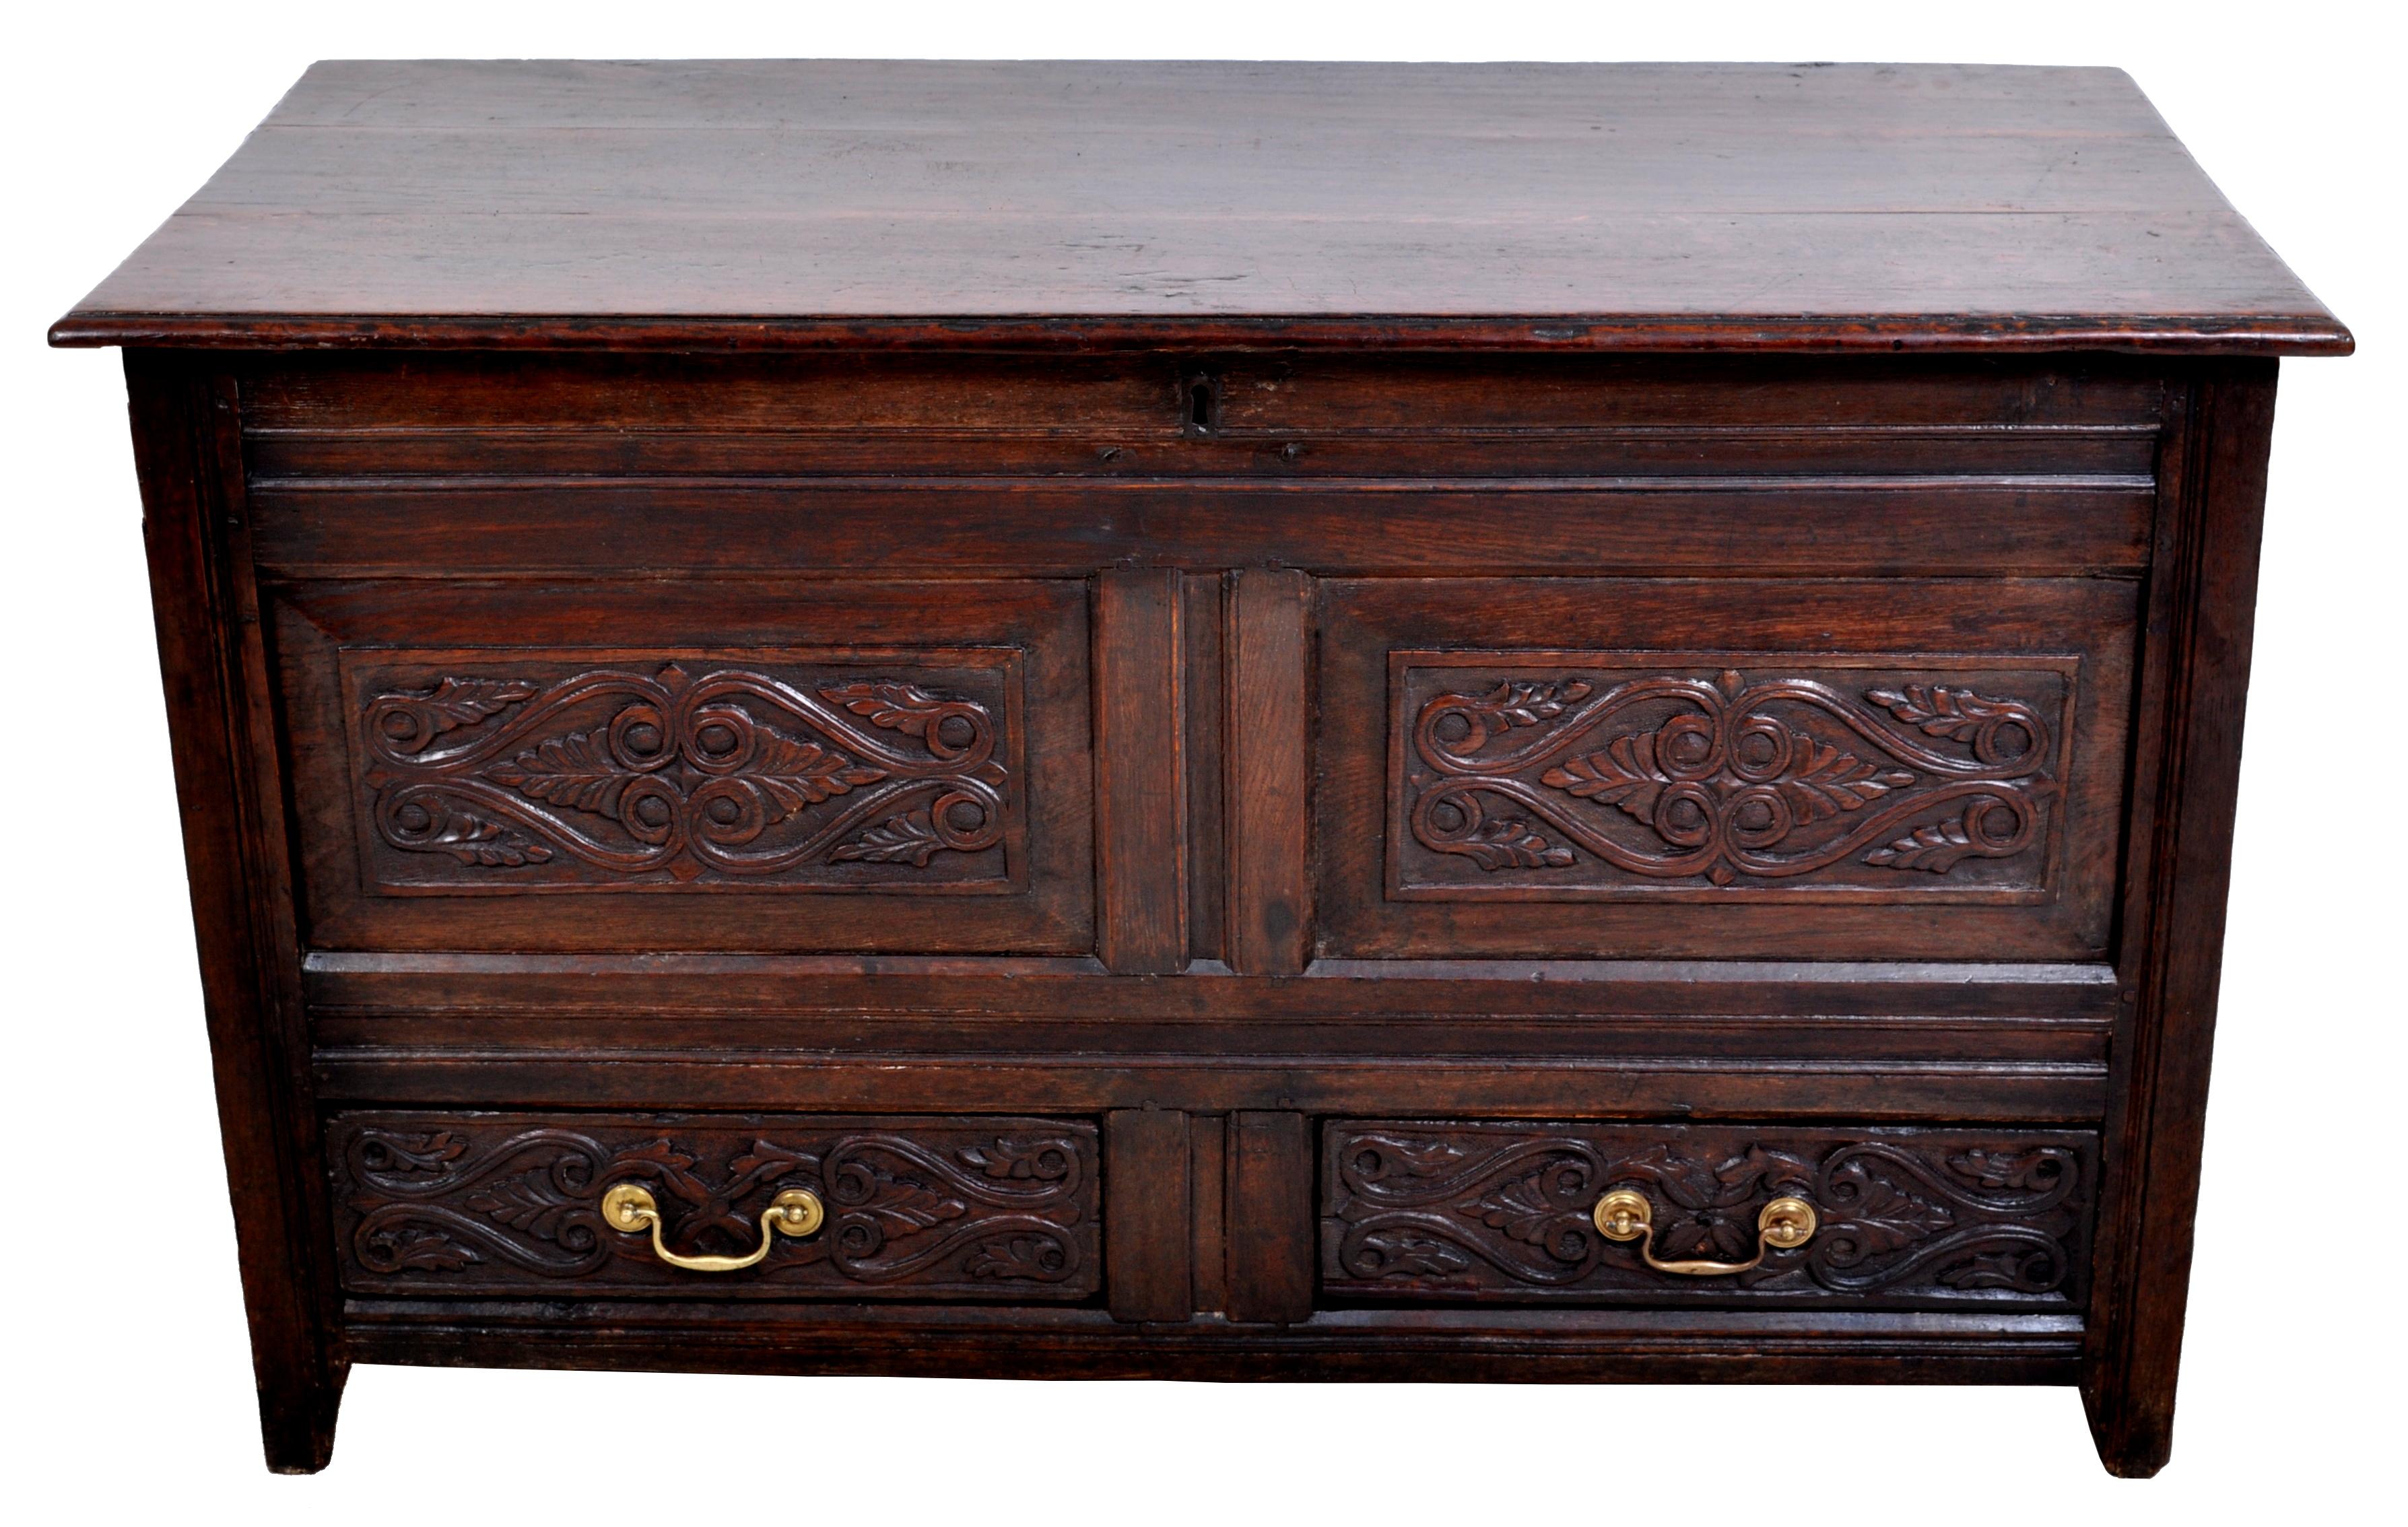 Charles II Antique English Late 17th Century Carved Oak Mule Chest / Coffer, circa 1680